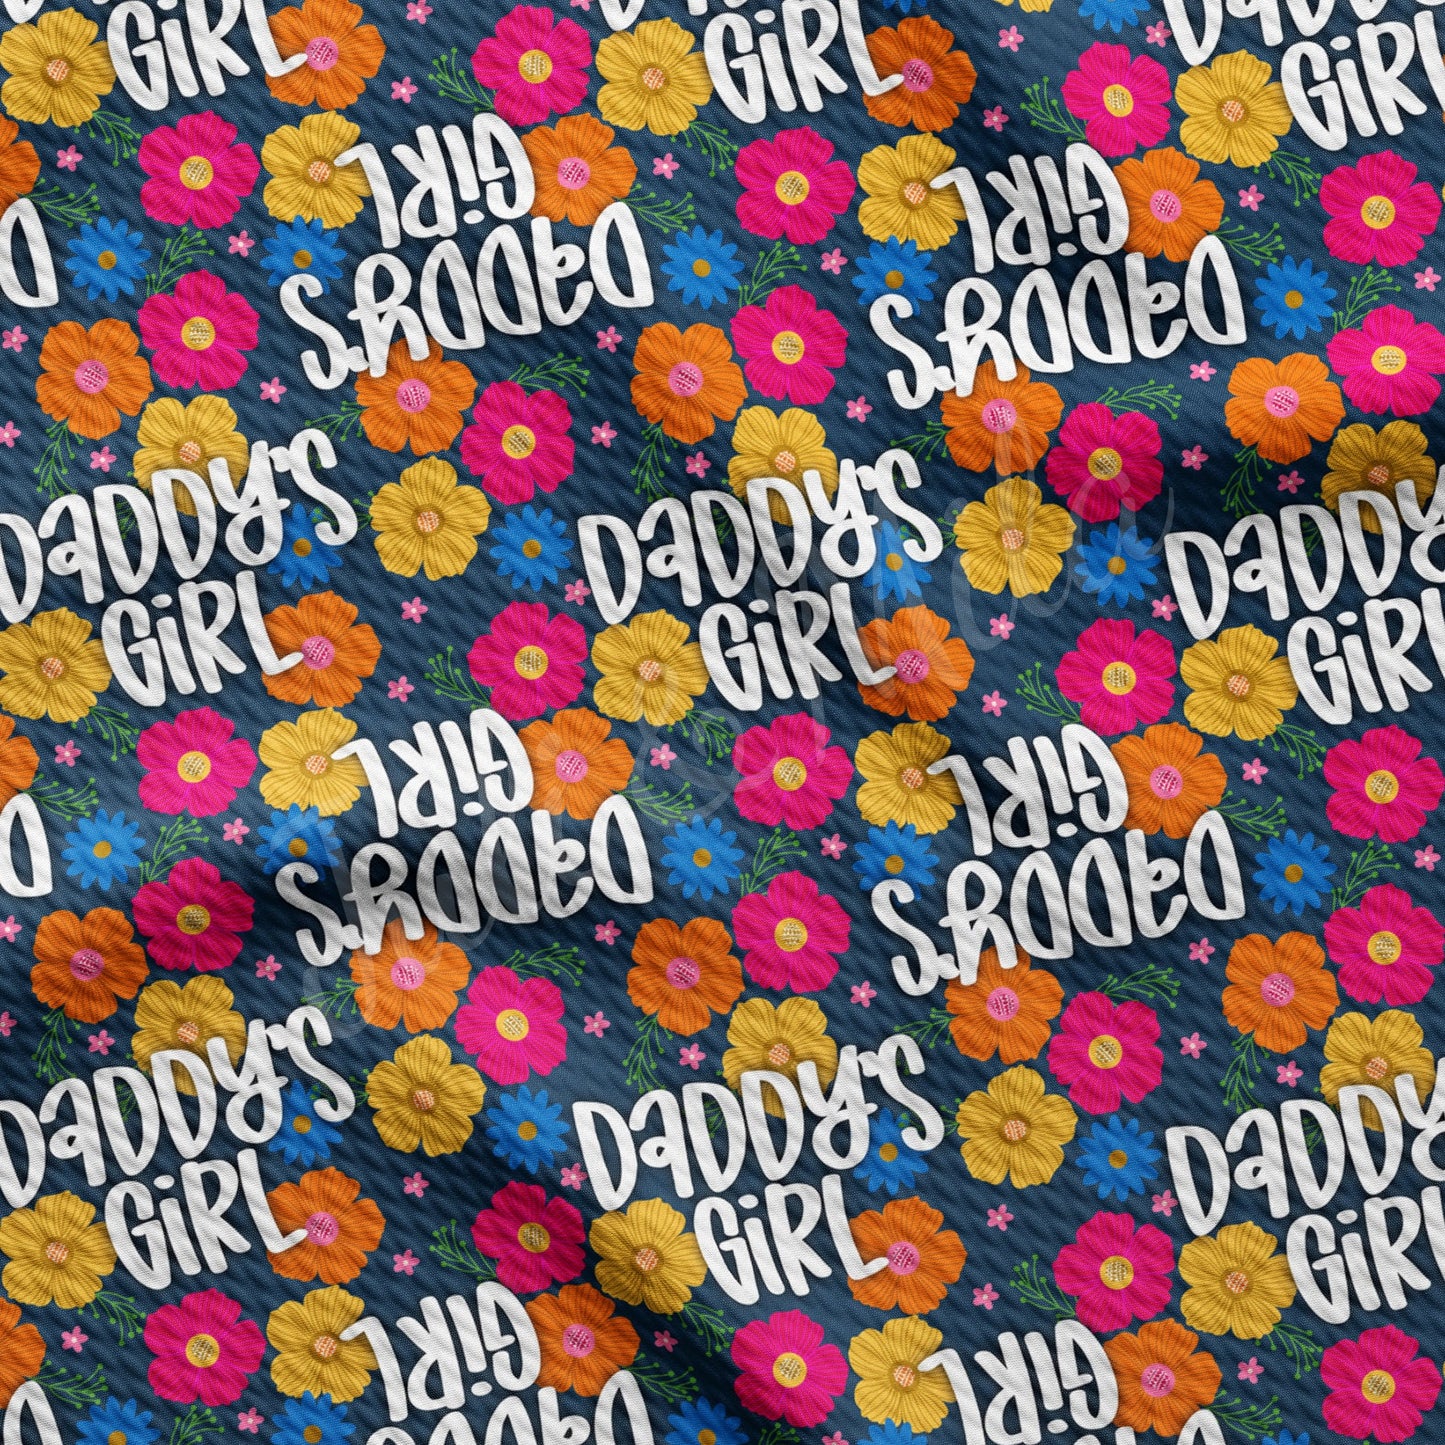 Daddys Girl Bullet Textured Fabric AA1151